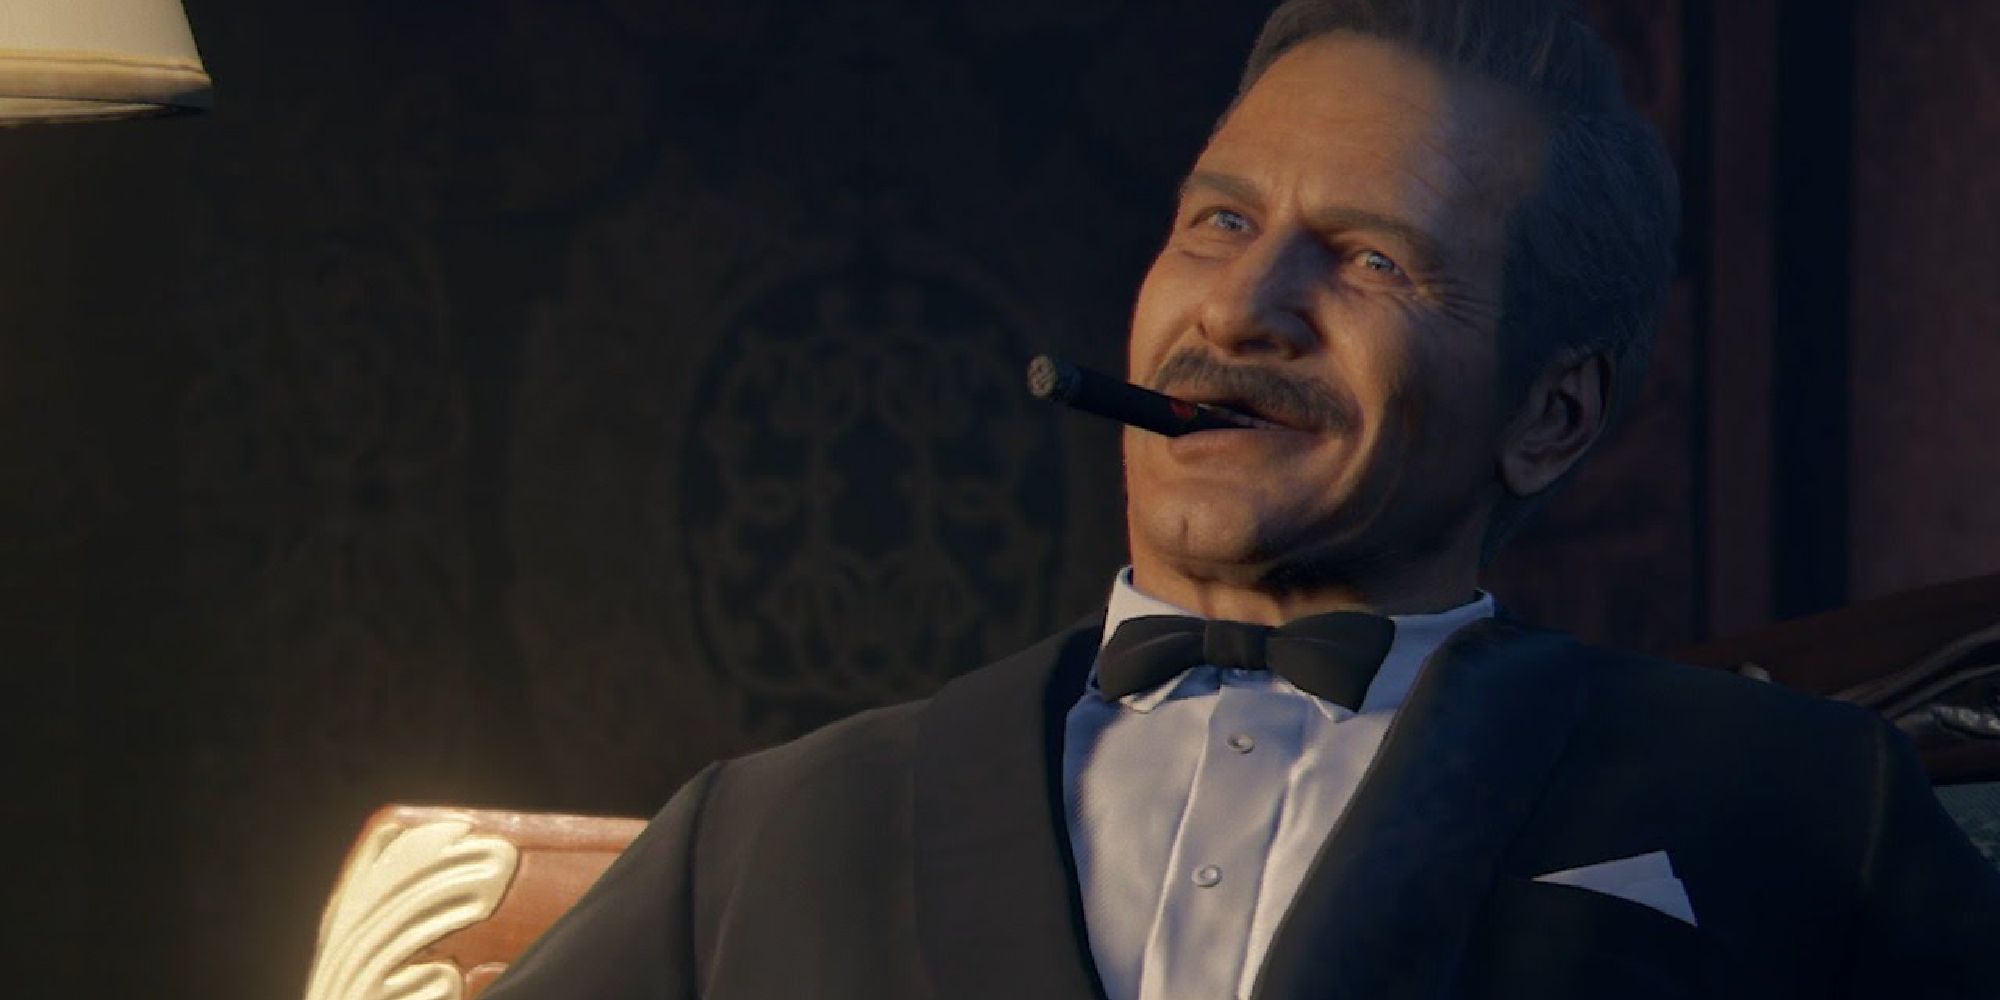 Victor Sullivan sits in a chair with his signature cocky grin and cigar, dressed sharply in a tuxedo.